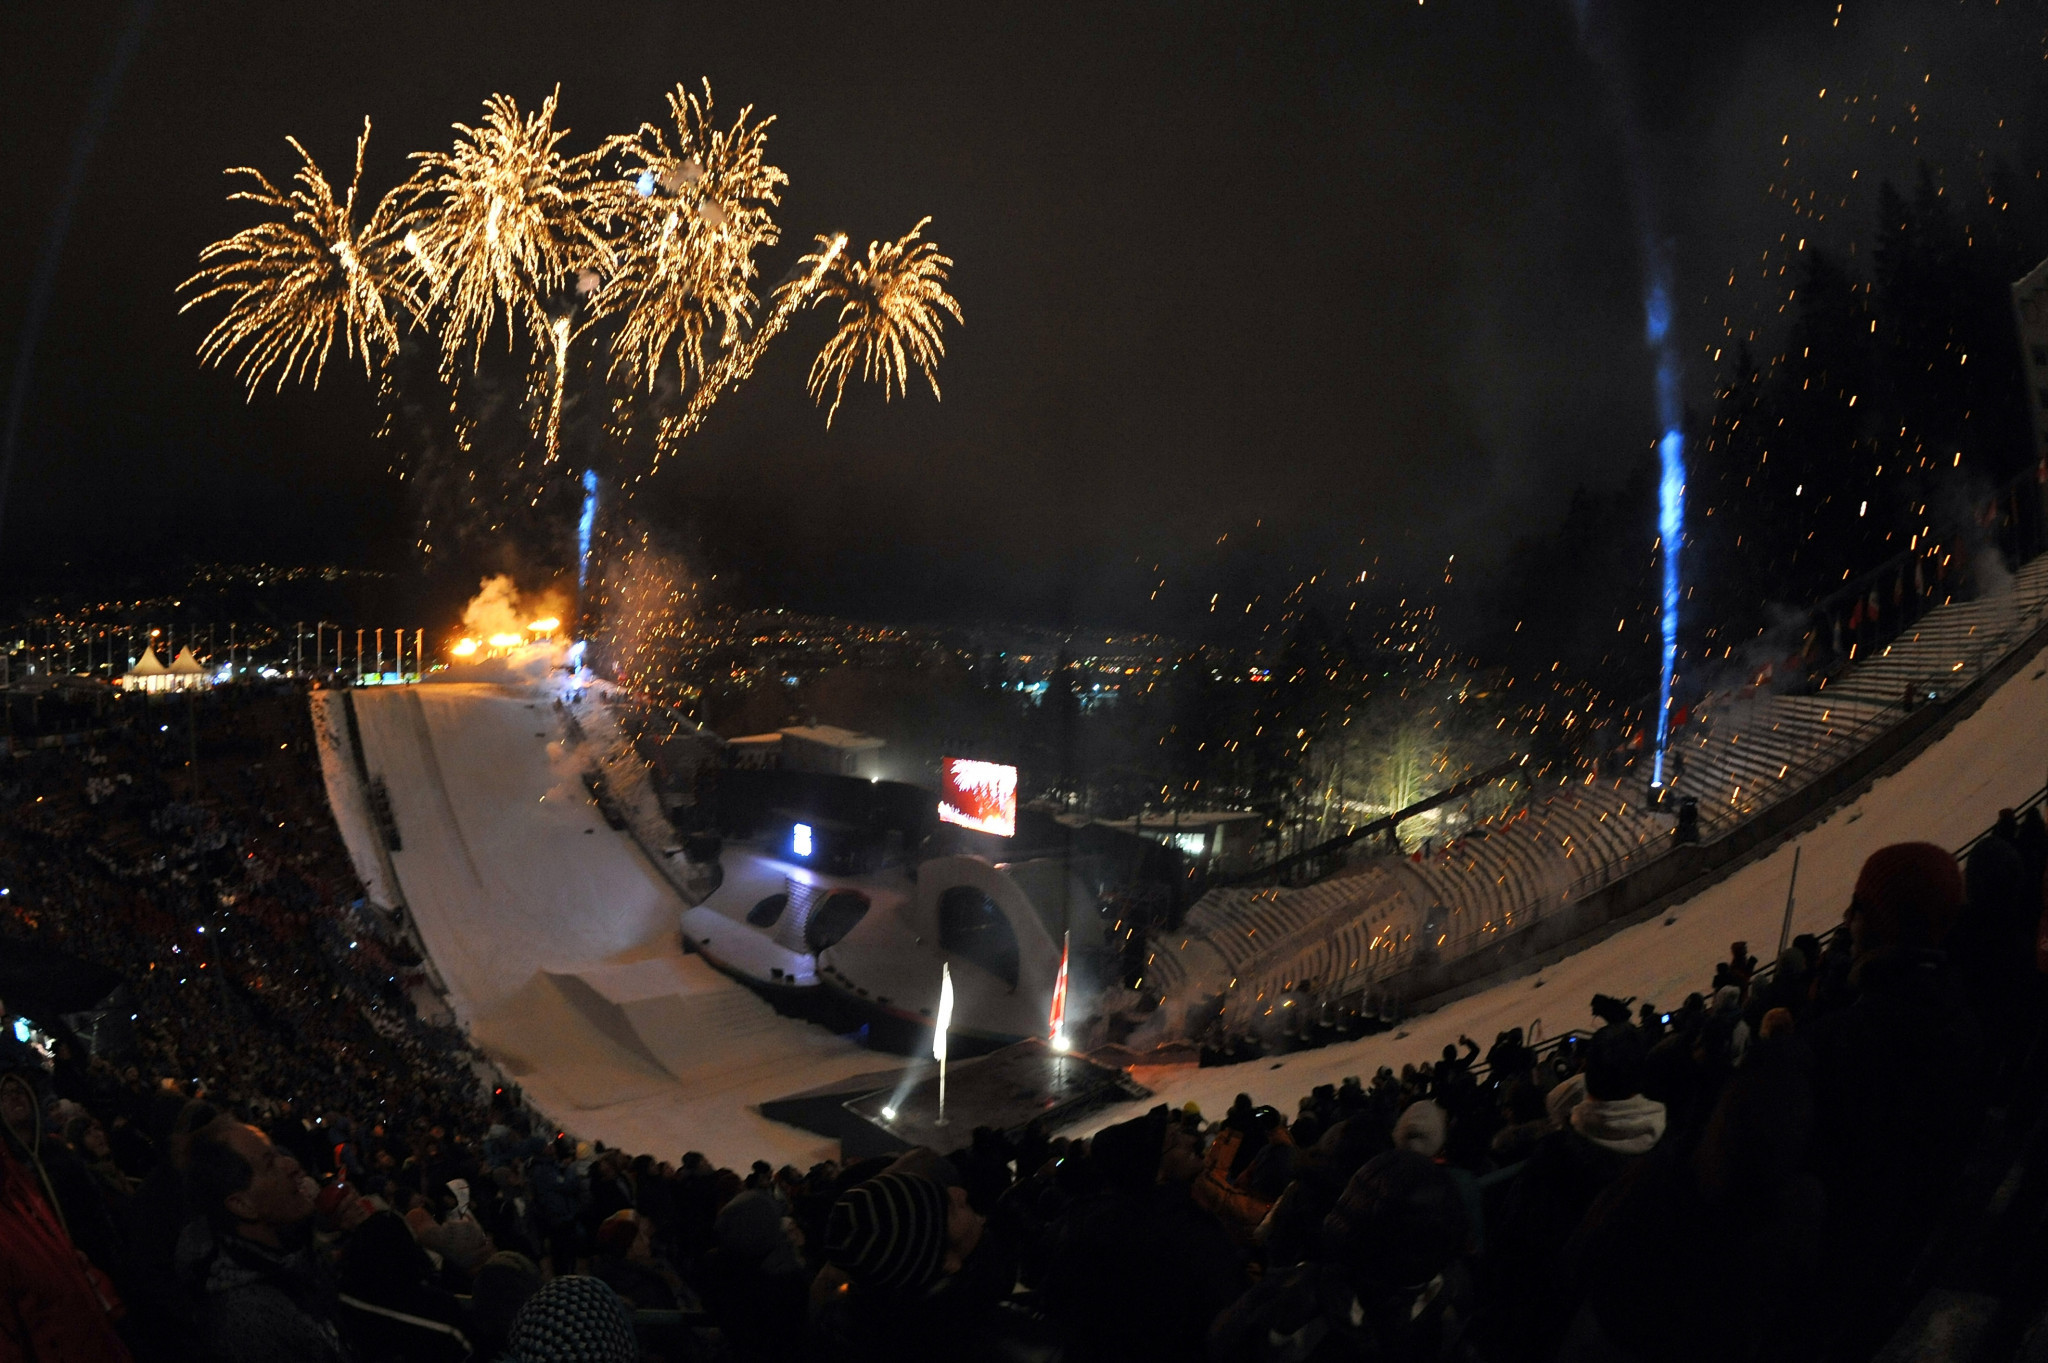 The Innsbruck 2012 Opening Ceremony took place in a vast ski-jumping bowl ©Getty Images